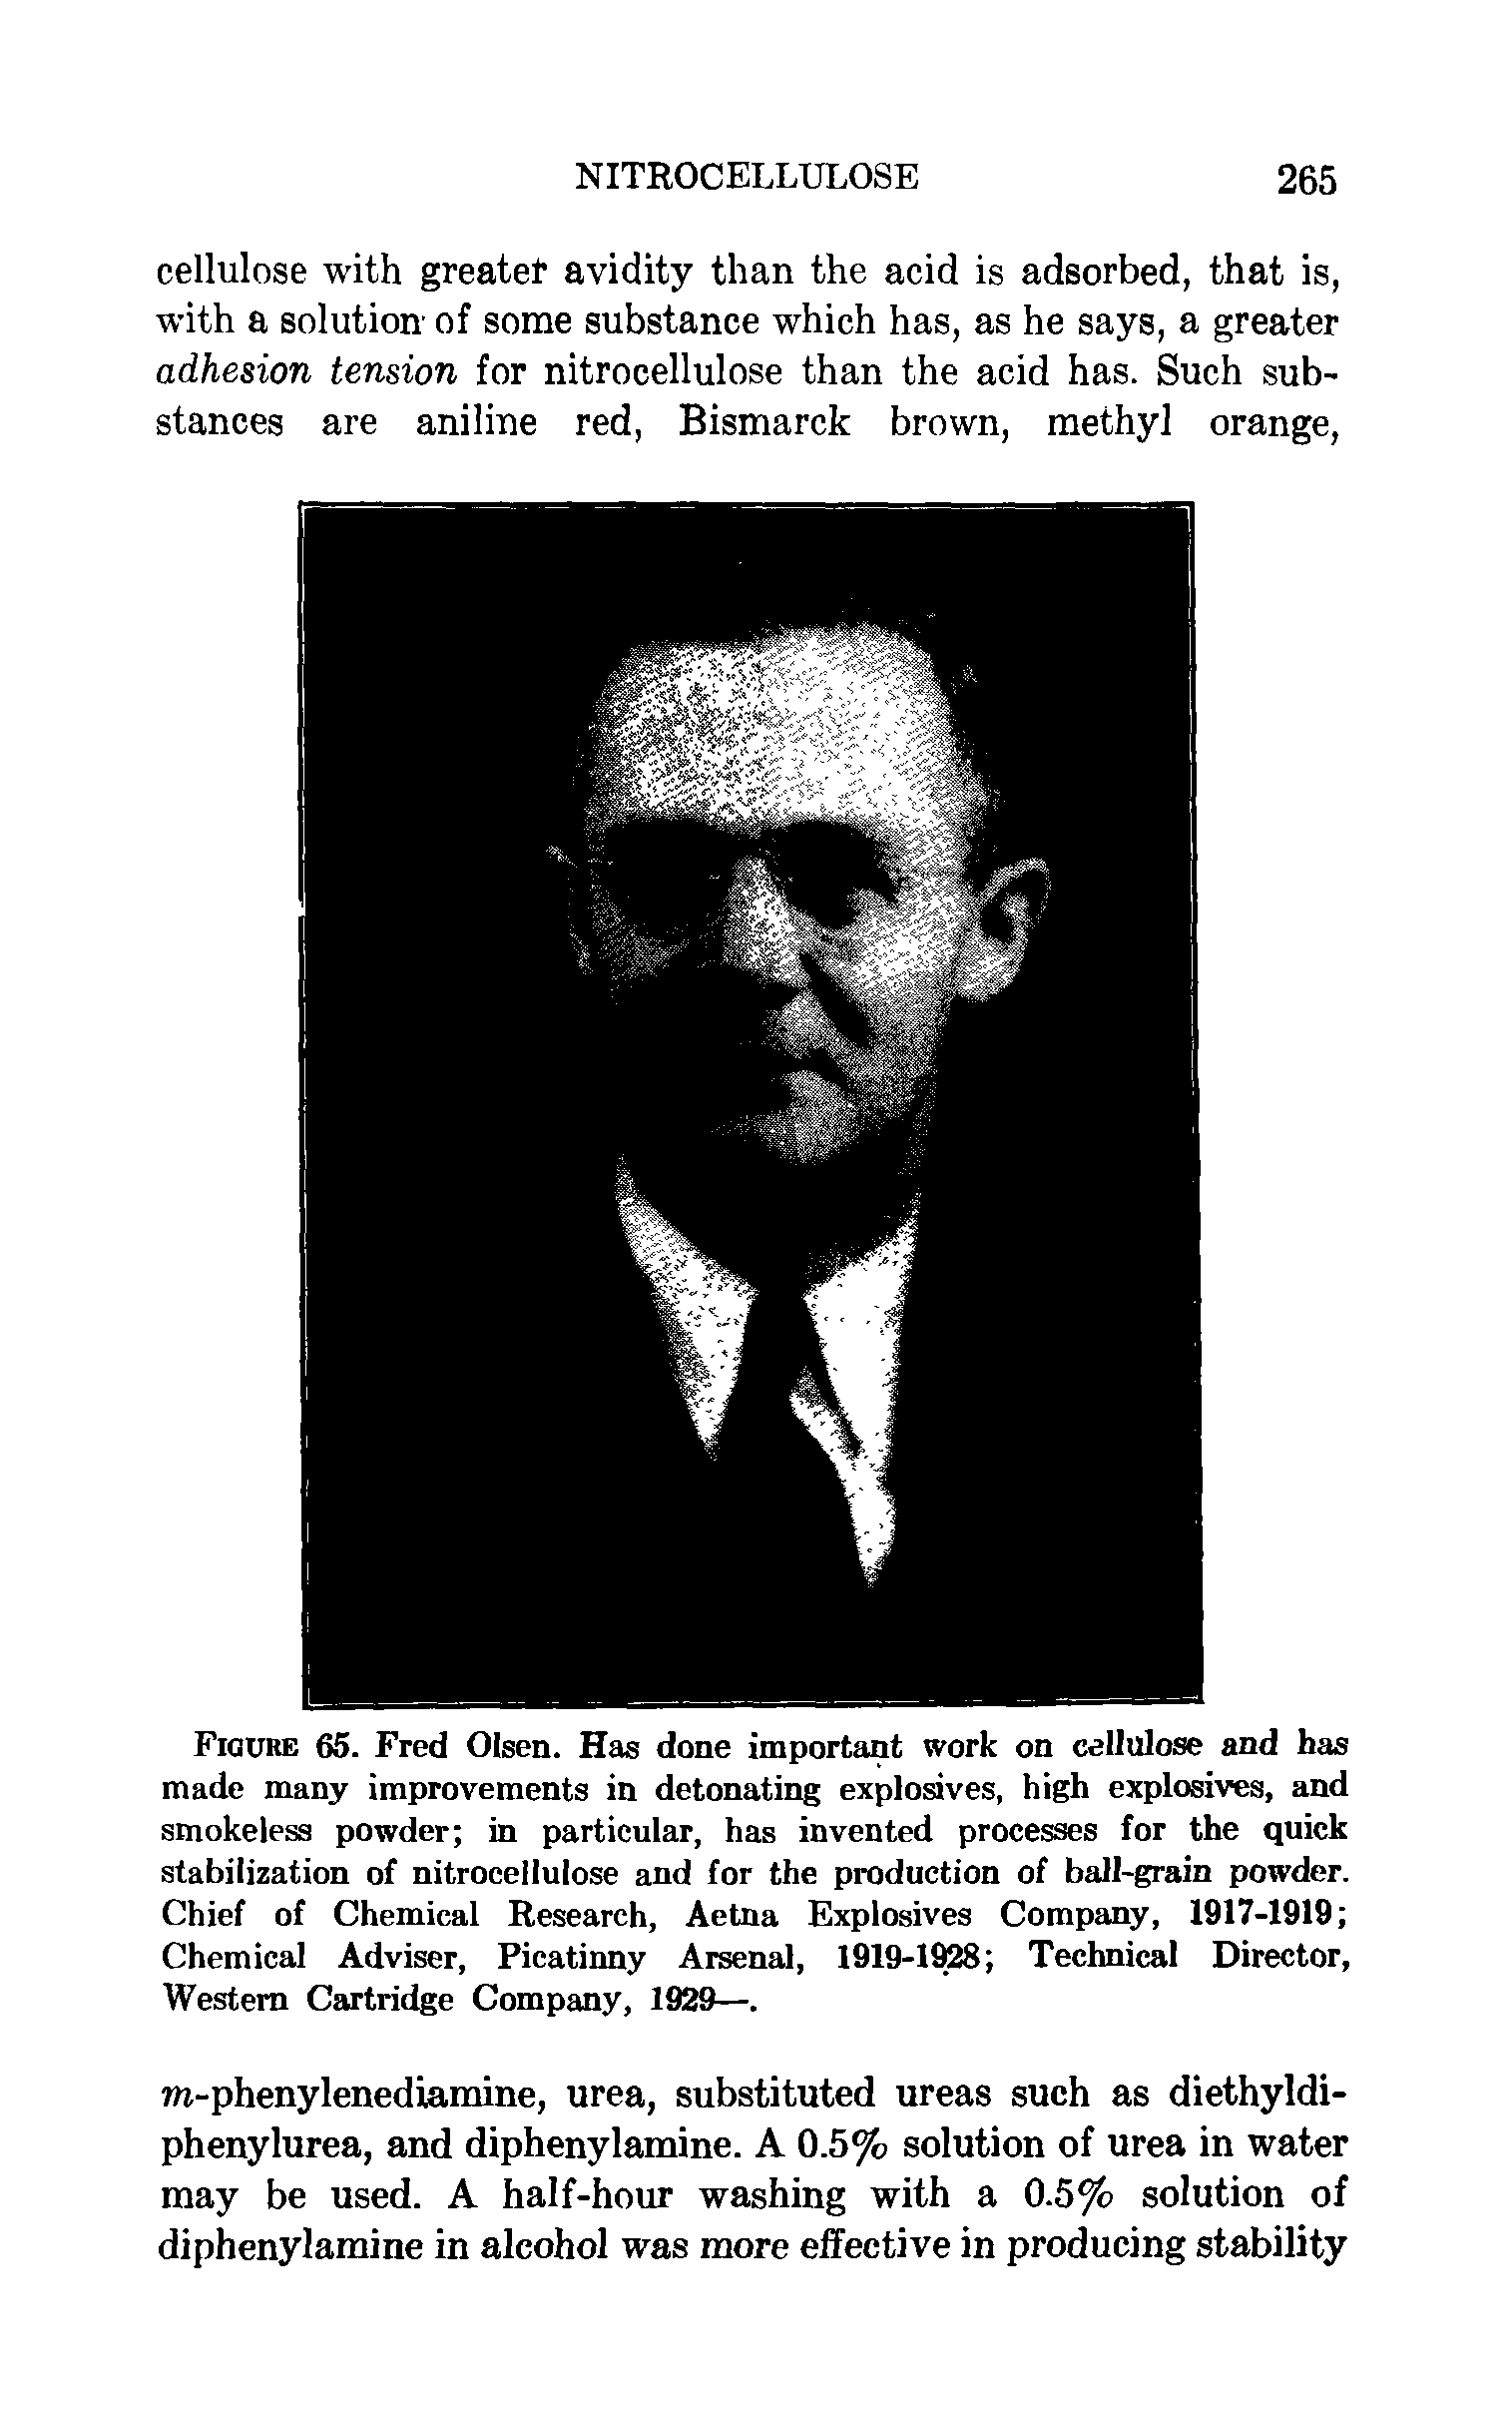 Figure 65. Fred Olsen. Has done important work on cellulose and has made many improvements in detonating explosives, high explosives, and smokeless powder in particular, has invented processes for the quick stabilization of nitrocellulose and for the production of ball-grain powder. Chief of Chemical Research, Aetna Explosives Company, 1917-1919 Chemical Adviser, Picatinny Arsenal, 1919-1928 Technical Director, Western Cartridge Company, 1929—.